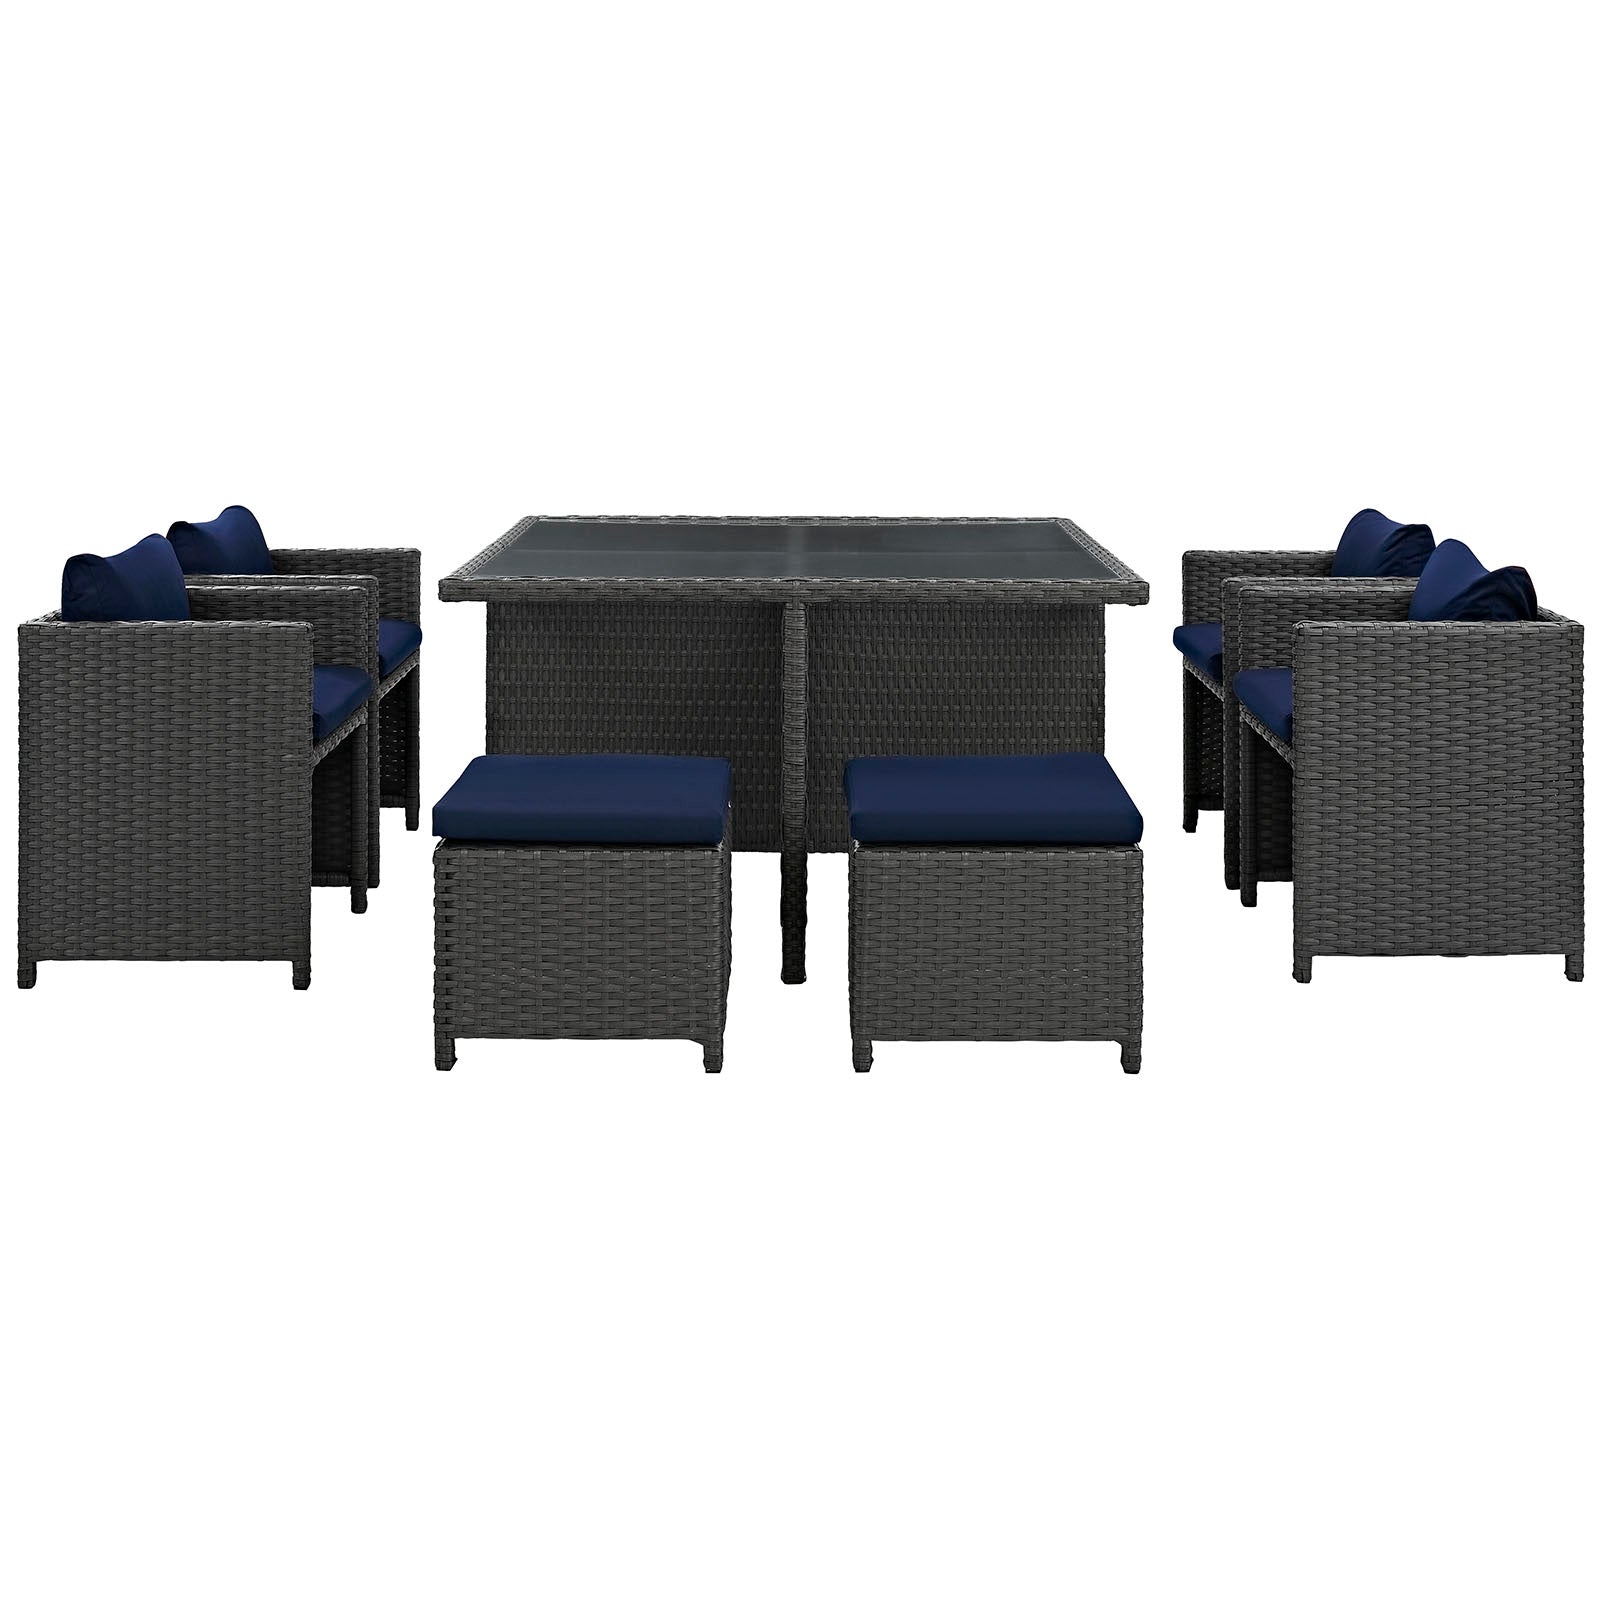 Sojourn 9 Piece Outdoor Patio Dining Set Canvas Navy